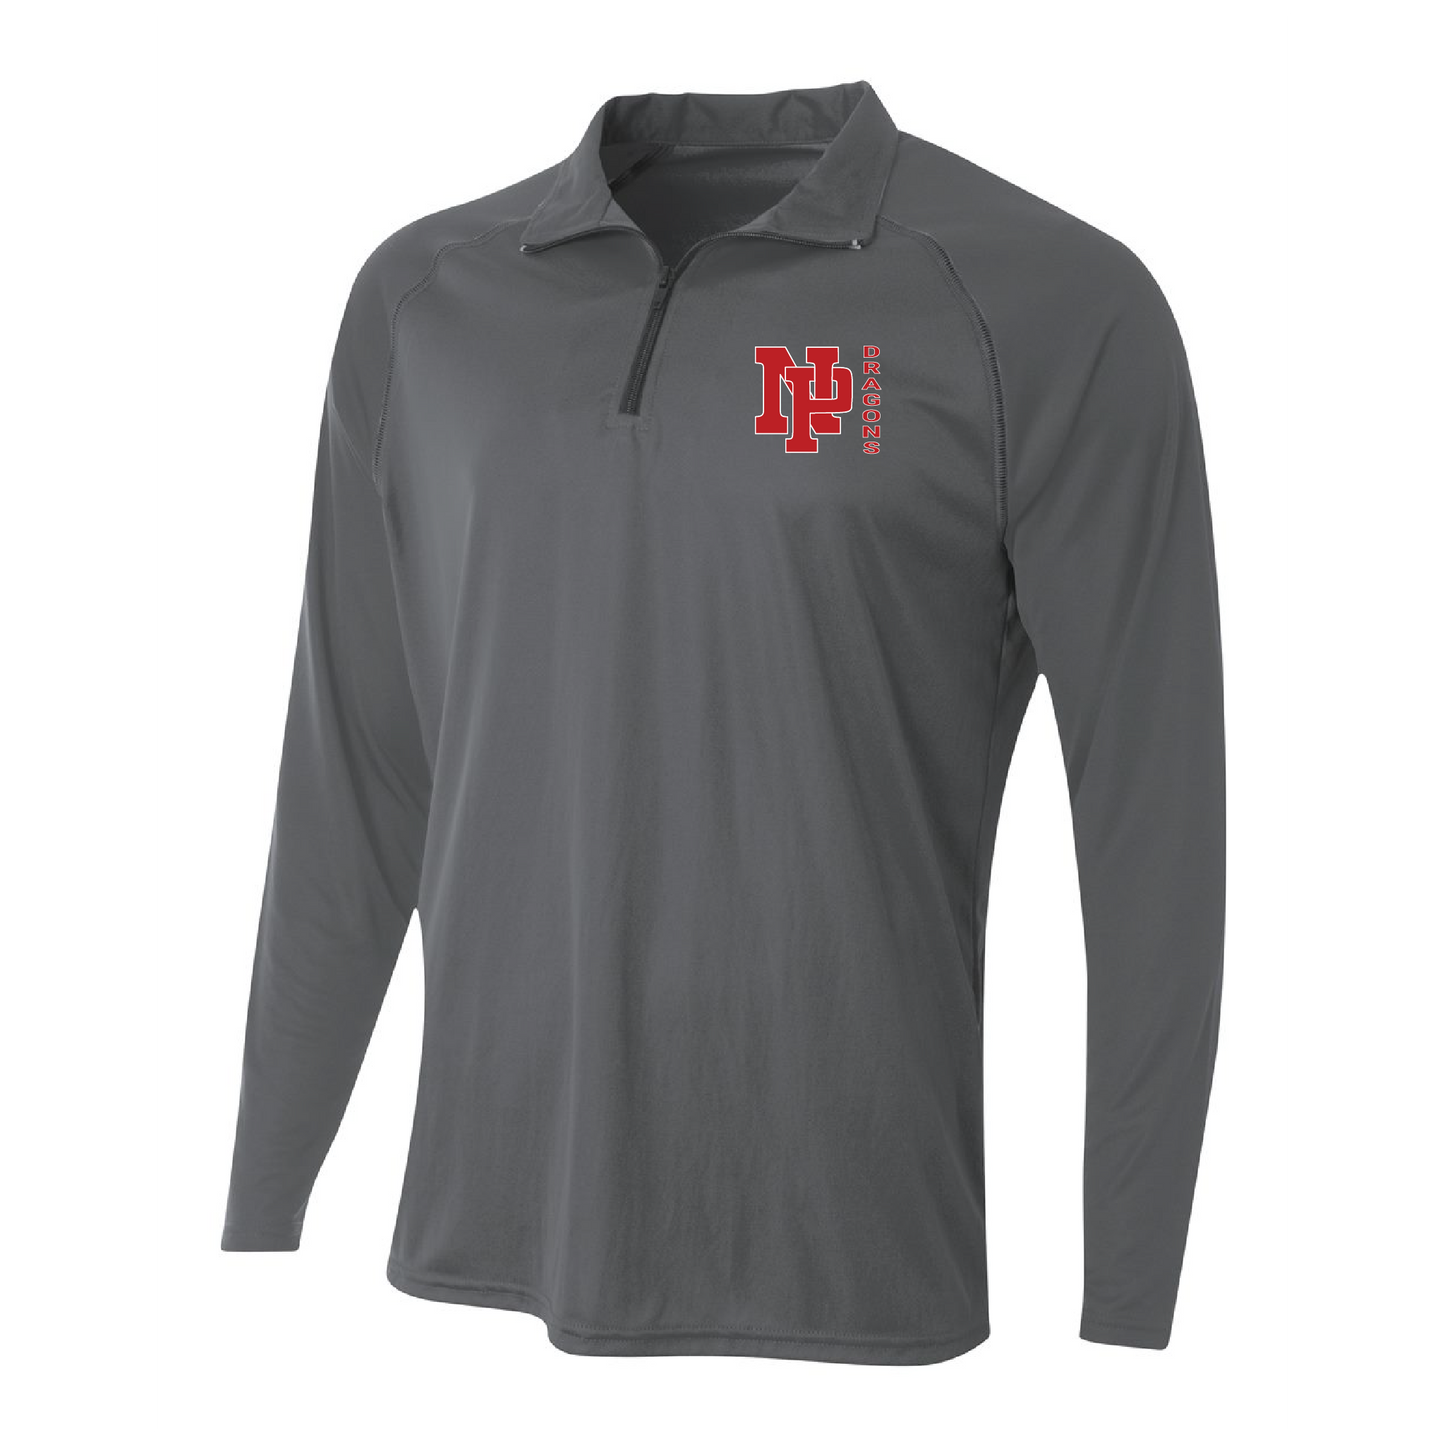 Mens Quarter Zip Pullover - Red NP DRAGONS, side by side